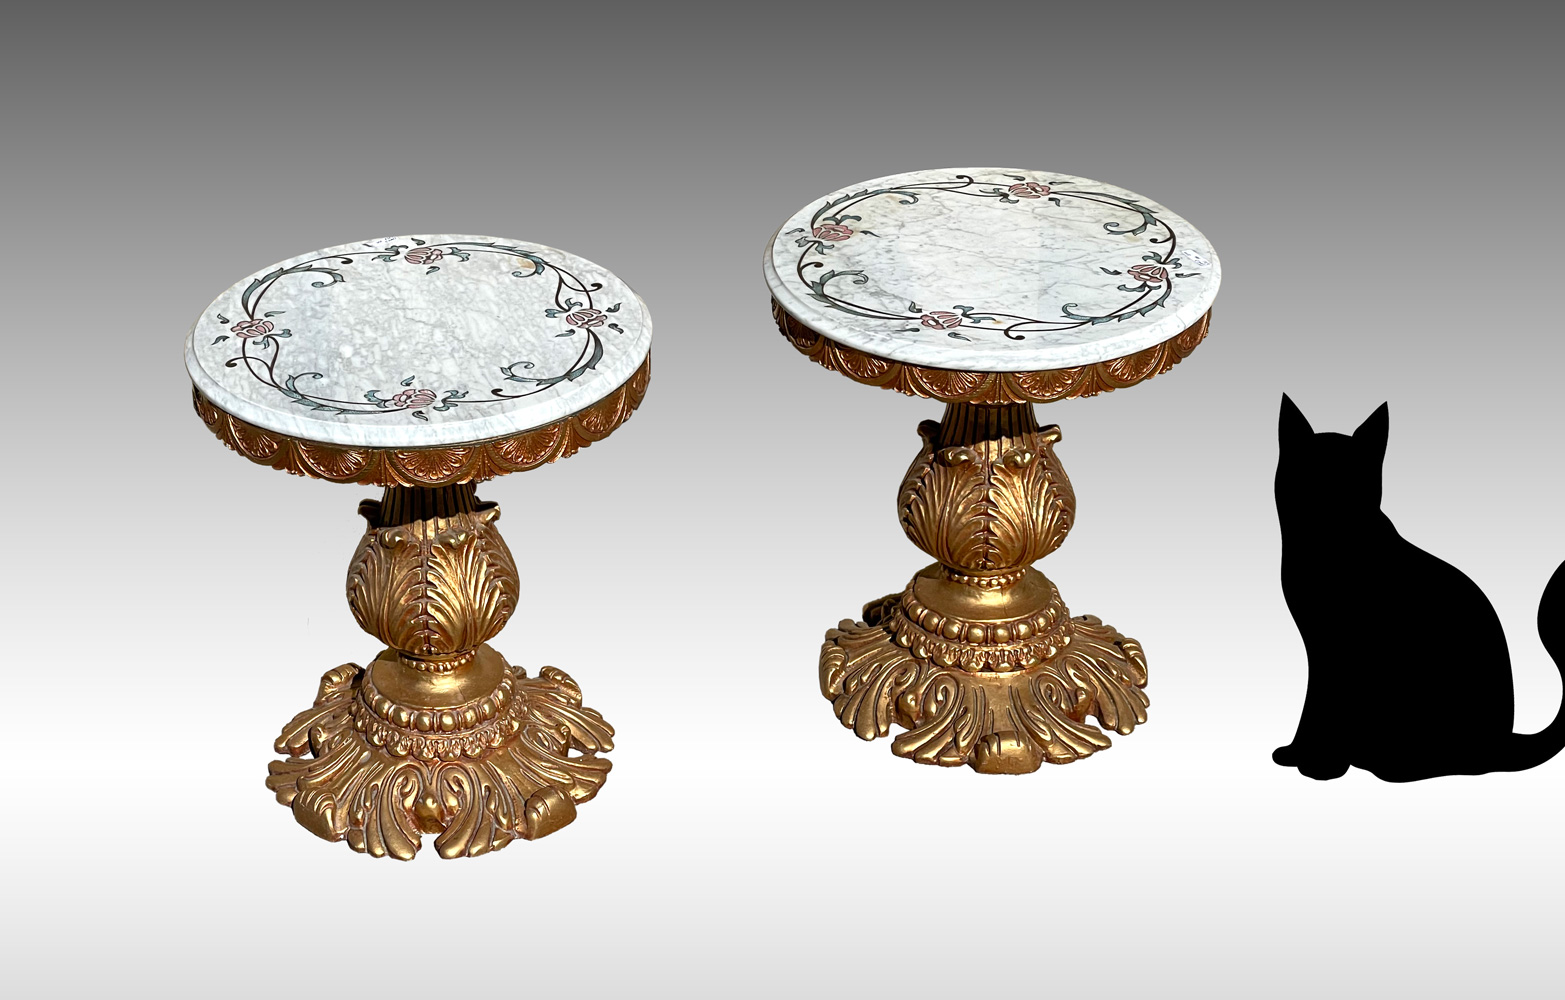 PAIR OF MARBLE TOP END TABLES: